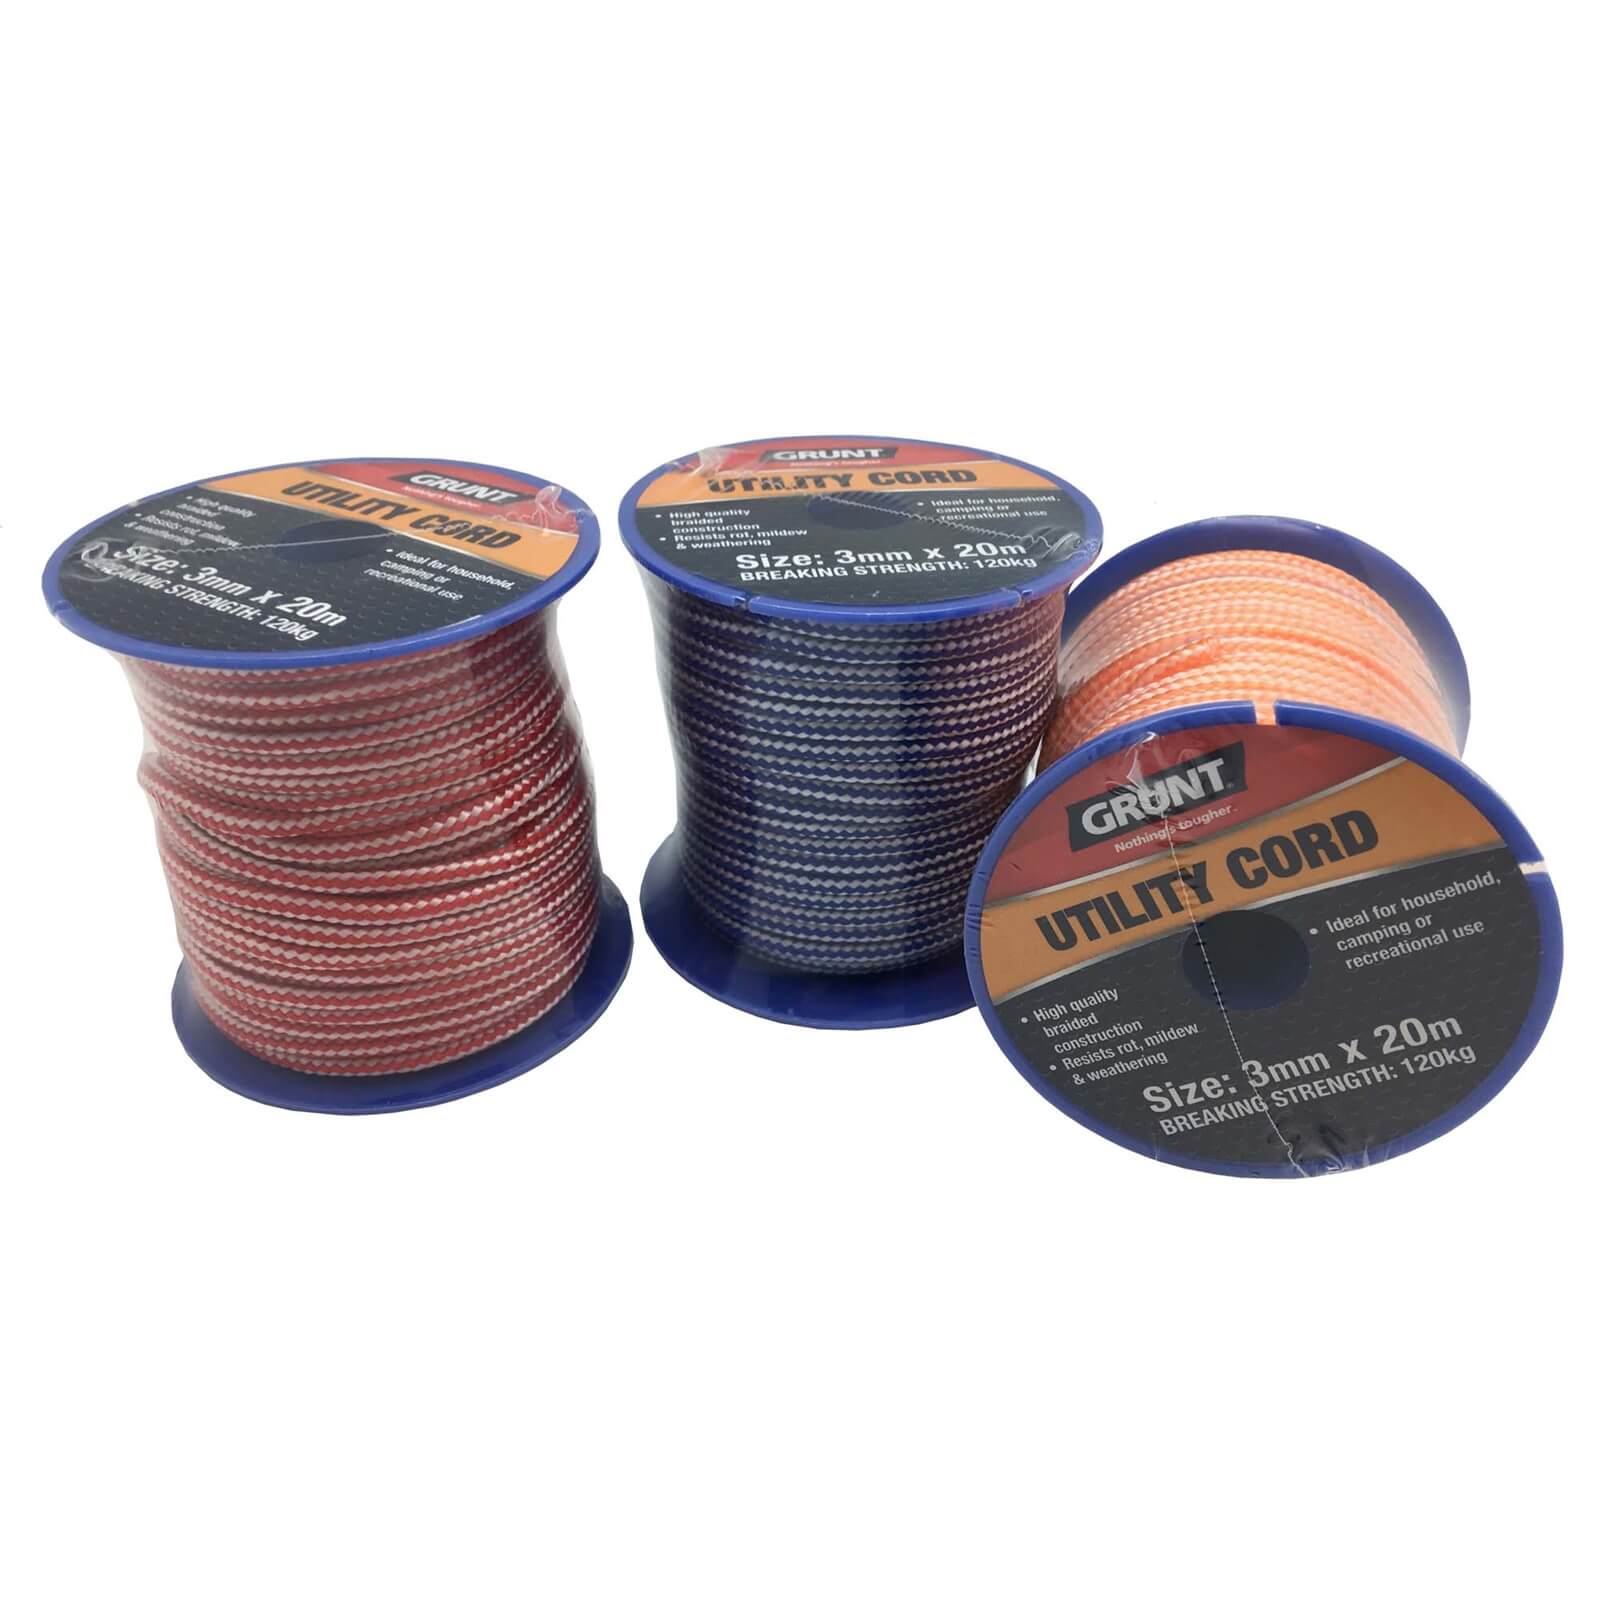 Photo of Grunt Utility Cord 3mm X 20m